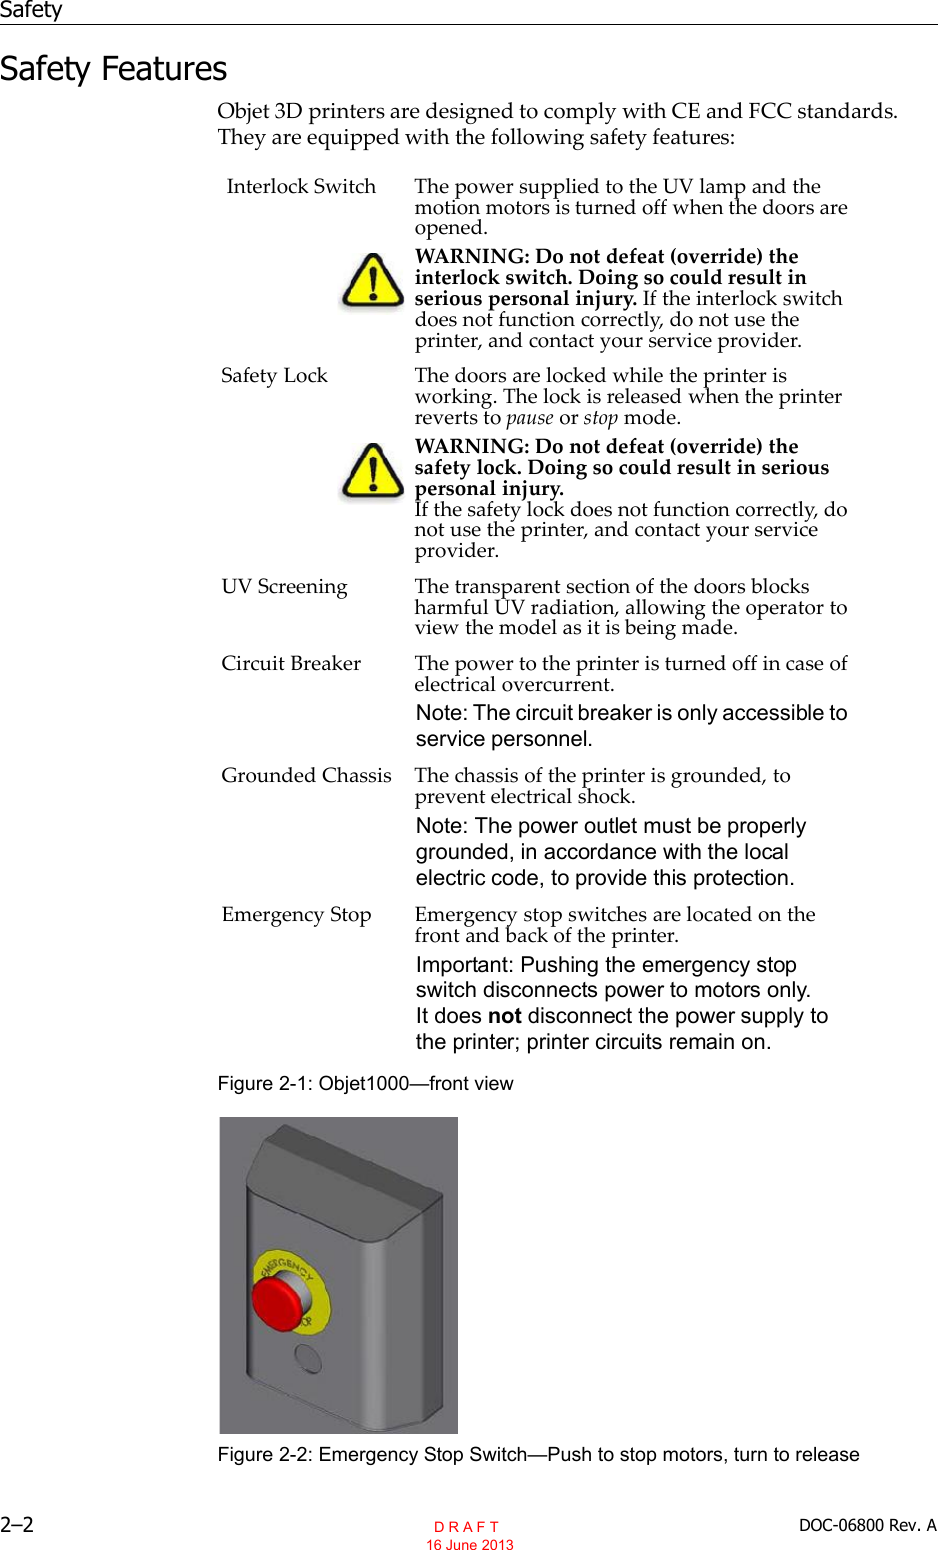 Safety2–2 DOC-06800 Rev. ASafety FeaturesObjet 3D printers are designed to comply with CE and FCC standards.They are equipped with the following safety features:Figure 2-1: Objet1000—front viewFigure 2-2: Emergency Stop Switch—Push to stop motors, turn to releaseInterlock Switch The power supplied to the UV lamp and themotion motors is turned off when the doors areopened.WARNING: Do not defeat (override) theinterlock switch. Doing so could result inserious personal injury. If the interlock switchdoes not function correctly, do not use theprinter, and contact your service provider.Safety Lock The doors are locked while the printer isworking. The lock is released when the printerreverts to pause or stop mode.WARNING: Do not defeat (override) thesafety lock. Doing so could result in seriouspersonal injury.If the safety lock does not function correctly, donot use the printer, and contact your serviceprovider.UV Screening The transparent section of the doors blocksharmful UV radiation, allowing the operator toview the model as it is being made.Circuit Breaker The power to the printer is turned off in case ofelectrical overcurrent.Note: The circuit breaker is only accessible to service personnel.Grounded Chassis The chassis of the printer is grounded, toprevent electrical shock.Note: The power outlet must be properly grounded, in accordance with the local electric code, to provide this protection.Emergency Stop Emergency stop switches are located on thefront and back of the printer.Important: Pushing the emergency stop switch disconnects power to motors only. It does not disconnect the power supply to the printer; printer circuits remain on.  D R A F T 16 June 2013